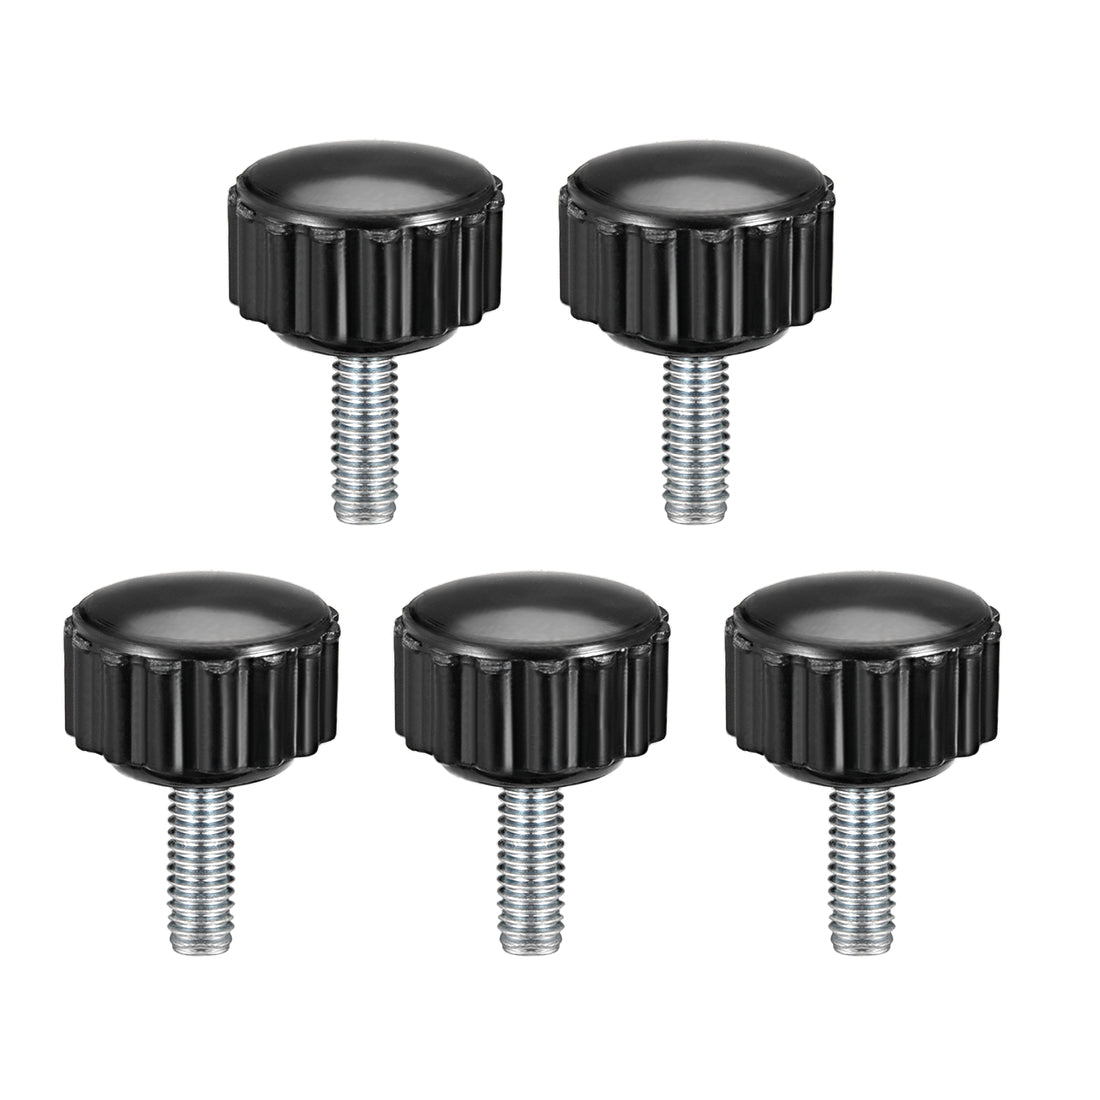 Uxcell Uxcell M6 x 20mm Male Thread Knurled Clamping Knobs Grip Thumb Screw on Type 5 Pcs